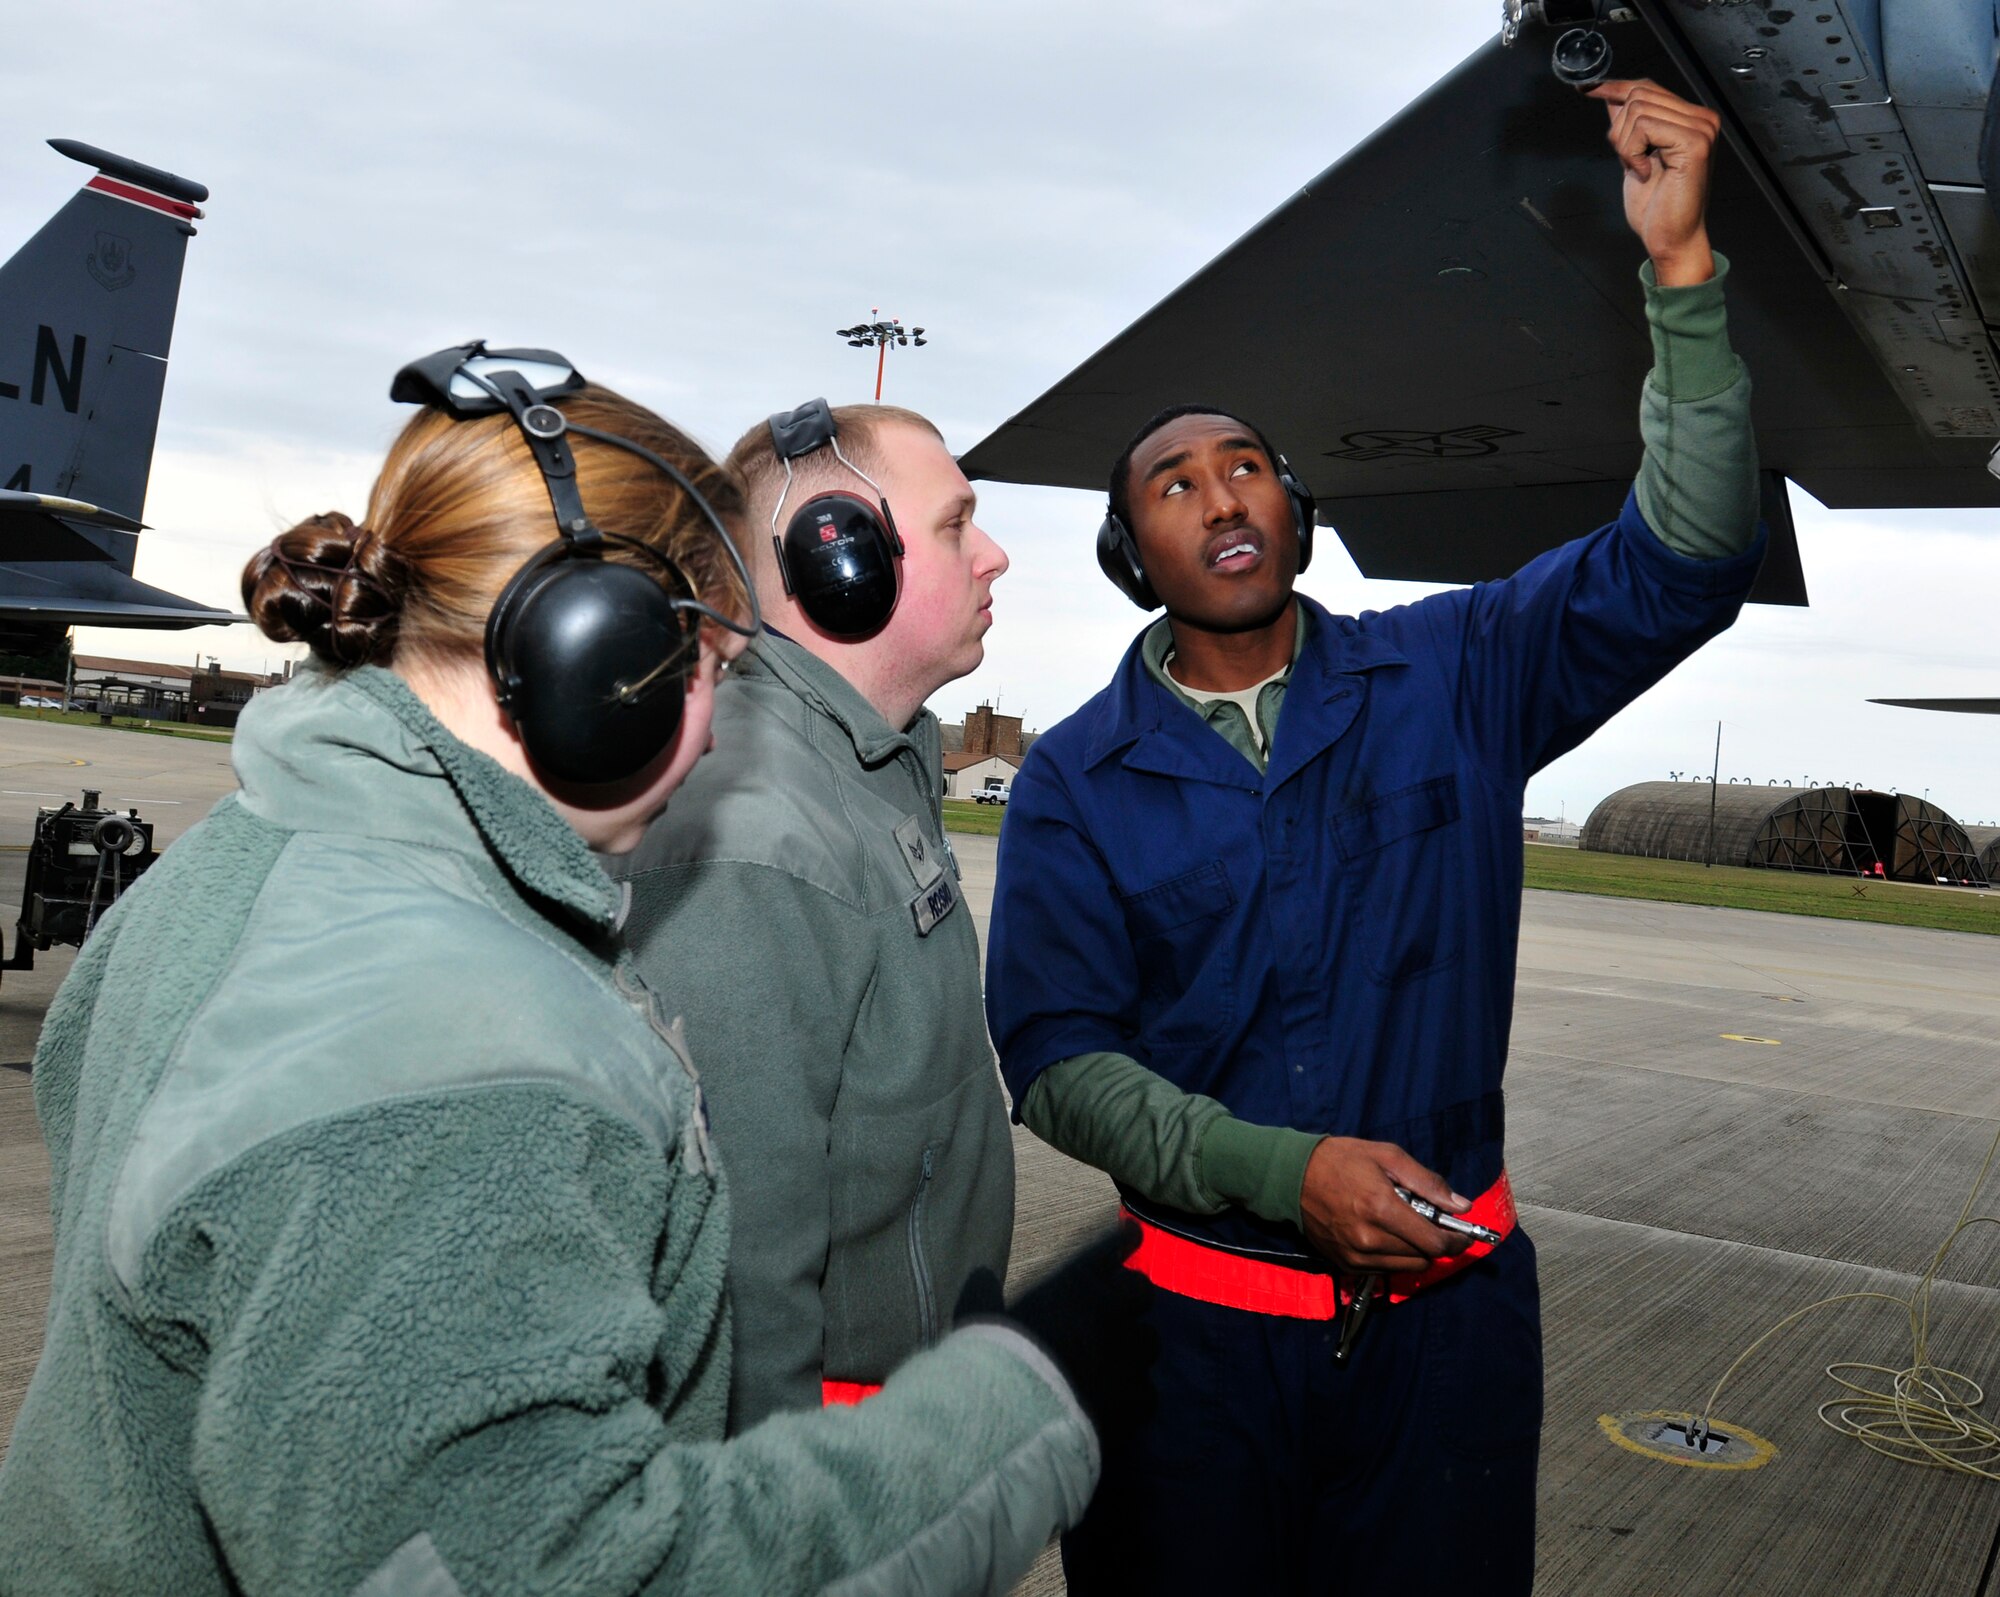 ROYAL AIR FORCE LAKENHEATH, England – (left to right) Airman 1st Class Ashton Colburn, 748th Aircraft Maintenance Squadron weapons team member, Senior Airman Timothy Rosio, 48th Aircraft Maintenance Squadron weapons team member and Staff Sgt. Arthur Belvin, 48th AMXS weapons load crew chief, perform an operations check on an F-15 Eagle on the flightline, Dec. 1, 2011. These Airmen contributed to the accomplishments which helped lead to Capt. William Bernecker, former 48th AMXS Officer in Charge, being awarded the Gen. Lew Allen Jr.Trophy. (U.S. Air Force photo by Senior Airman Tiffany M. Deuel)